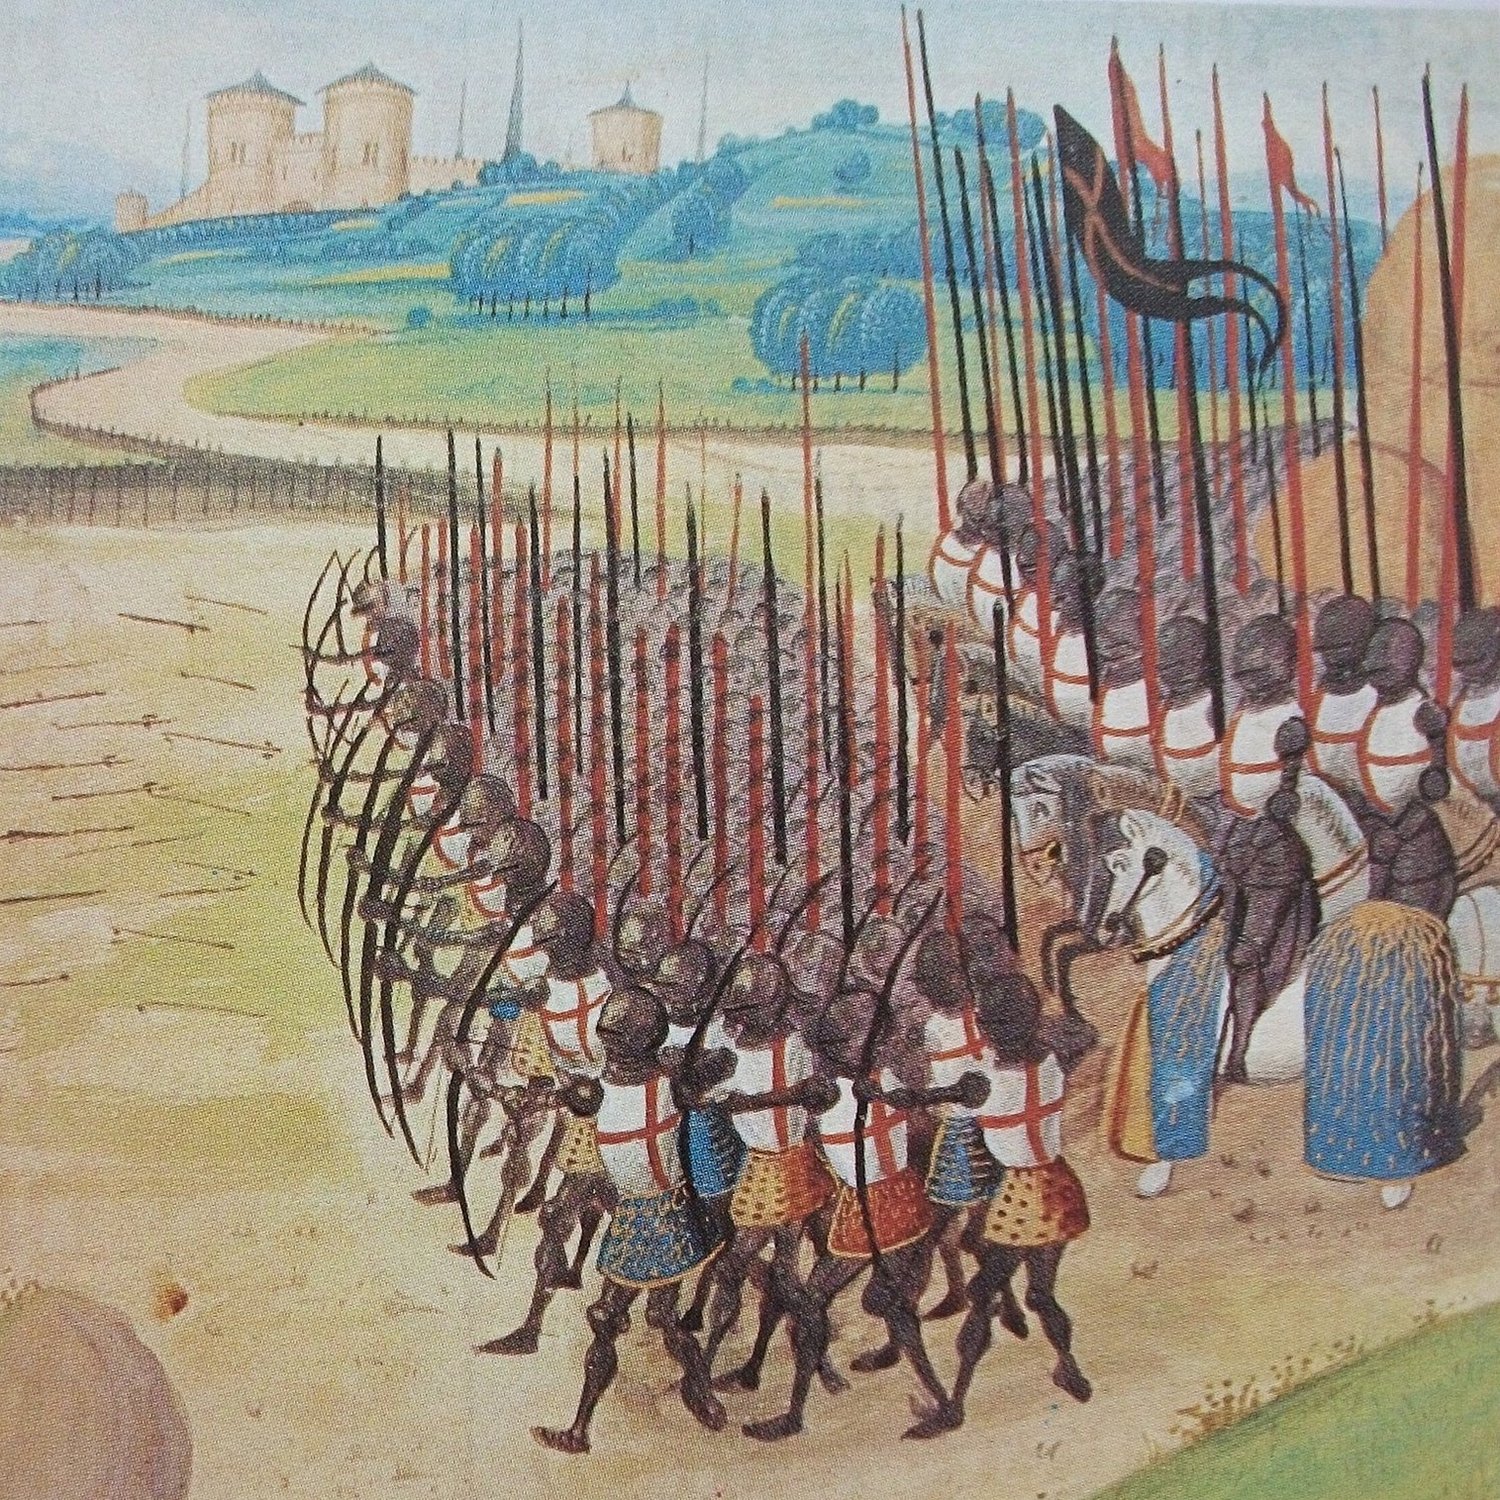 208: War of the roses: The Battle of Agincourt